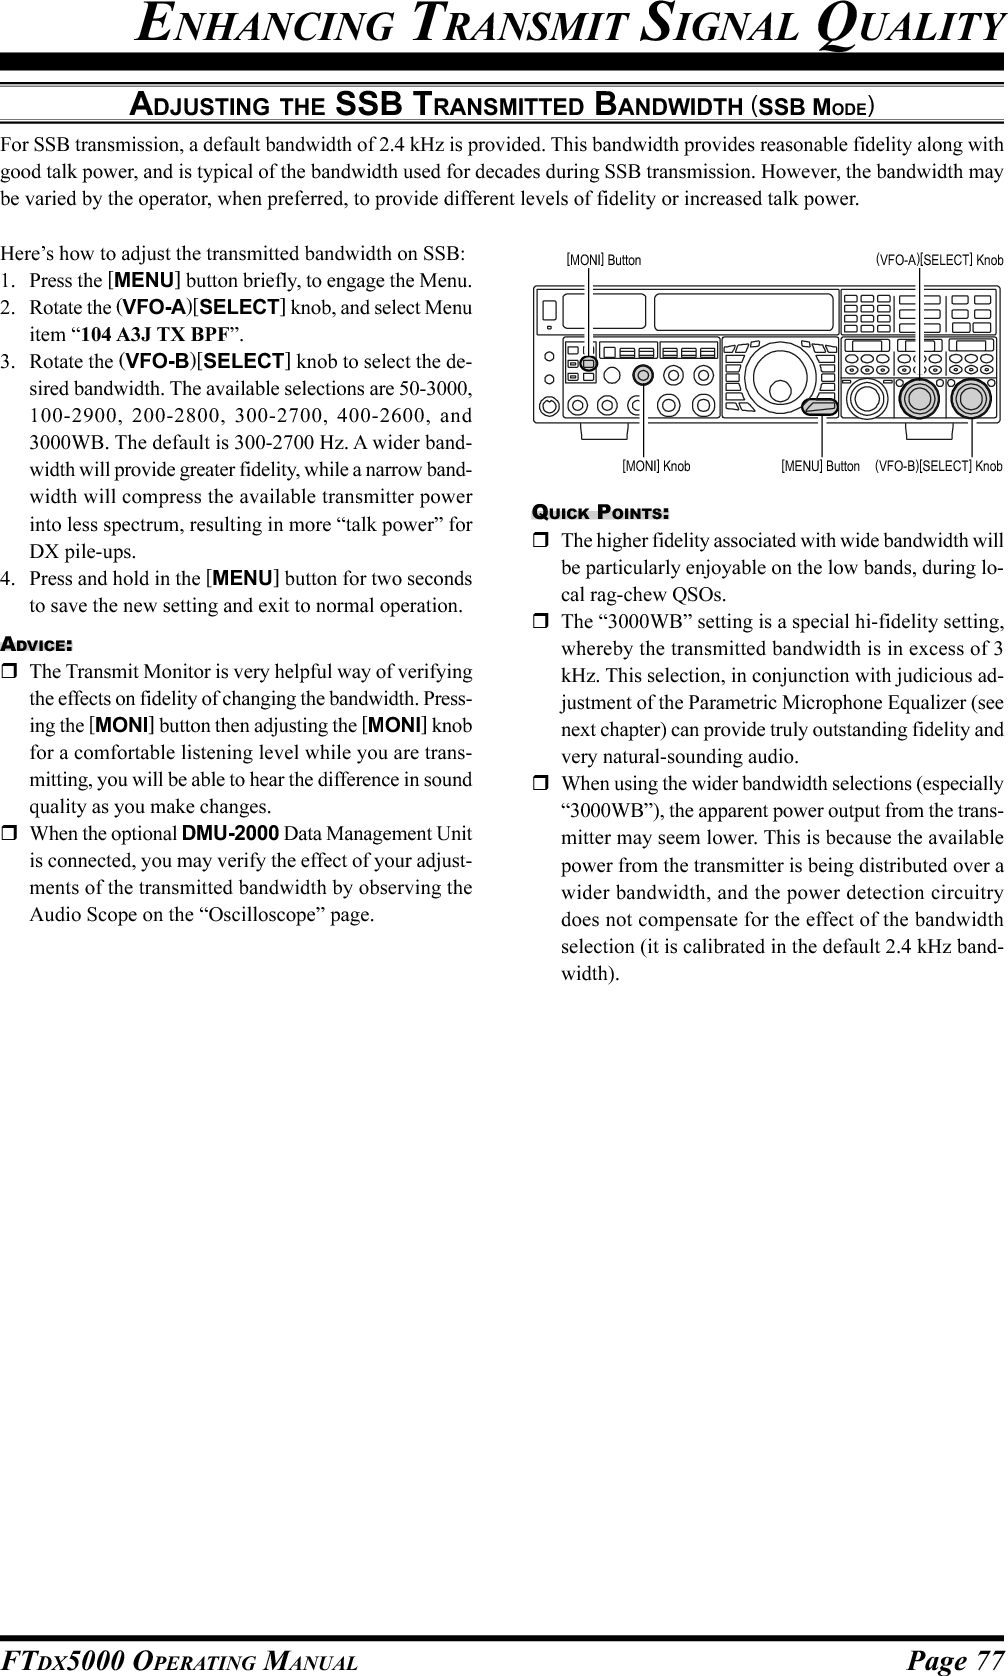 Page 77FTDX5000 OPERATING MANUALADJUSTING THE SSB TRANSMITTED BANDWIDTH (SSB MODE)For SSB transmission, a default bandwidth of 2.4 kHz is provided. This bandwidth provides reasonable fidelity along withgood talk power, and is typical of the bandwidth used for decades during SSB transmission. However, the bandwidth maybe varied by the operator, when preferred, to provide different levels of fidelity or increased talk power.ENHANCING TRANSMIT SIGNAL QUALITYHere’s how to adjust the transmitted bandwidth on SSB:1. Press the [MENU] button briefly, to engage the Menu.2. Rotate the (VFO-A)[SELECT] knob, and select Menuitem “104 A3J TX BPF”.3. Rotate the (VFO-B)[SELECT] knob to select the de-sired bandwidth. The available selections are 50-3000,100-2900, 200-2800, 300-2700, 400-2600, and3000WB. The default is 300-2700 Hz. A wider band-width will provide greater fidelity, while a narrow band-width will compress the available transmitter powerinto less spectrum, resulting in more “talk power” forDX pile-ups.4. Press and hold in the [MENU] button for two secondsto save the new setting and exit to normal operation.ADVICE:The Transmit Monitor is very helpful way of verifyingthe effects on fidelity of changing the bandwidth. Press-ing the [MONI] button then adjusting the [MONI] knobfor a comfortable listening level while you are trans-mitting, you will be able to hear the difference in soundquality as you make changes.When the optional DMU-2000 Data Management Unitis connected, you may verify the effect of your adjust-ments of the transmitted bandwidth by observing theAudio Scope on the “Oscilloscope” page.QUICK POINTS:The higher fidelity associated with wide bandwidth willbe particularly enjoyable on the low bands, during lo-cal rag-chew QSOs.The “3000WB” setting is a special hi-fidelity setting,whereby the transmitted bandwidth is in excess of 3kHz. This selection, in conjunction with judicious ad-justment of the Parametric Microphone Equalizer (seenext chapter) can provide truly outstanding fidelity andvery natural-sounding audio.When using the wider bandwidth selections (especially“3000WB”), the apparent power output from the trans-mitter may seem lower. This is because the availablepower from the transmitter is being distributed over awider bandwidth, and the power detection circuitrydoes not compensate for the effect of the bandwidthselection (it is calibrated in the default 2.4 kHz band-width).(VFO-B)[SELECT] Knob[MENU] Button(VFO-A)[SELECT] Knob[MONI] Button[MONI] Knob